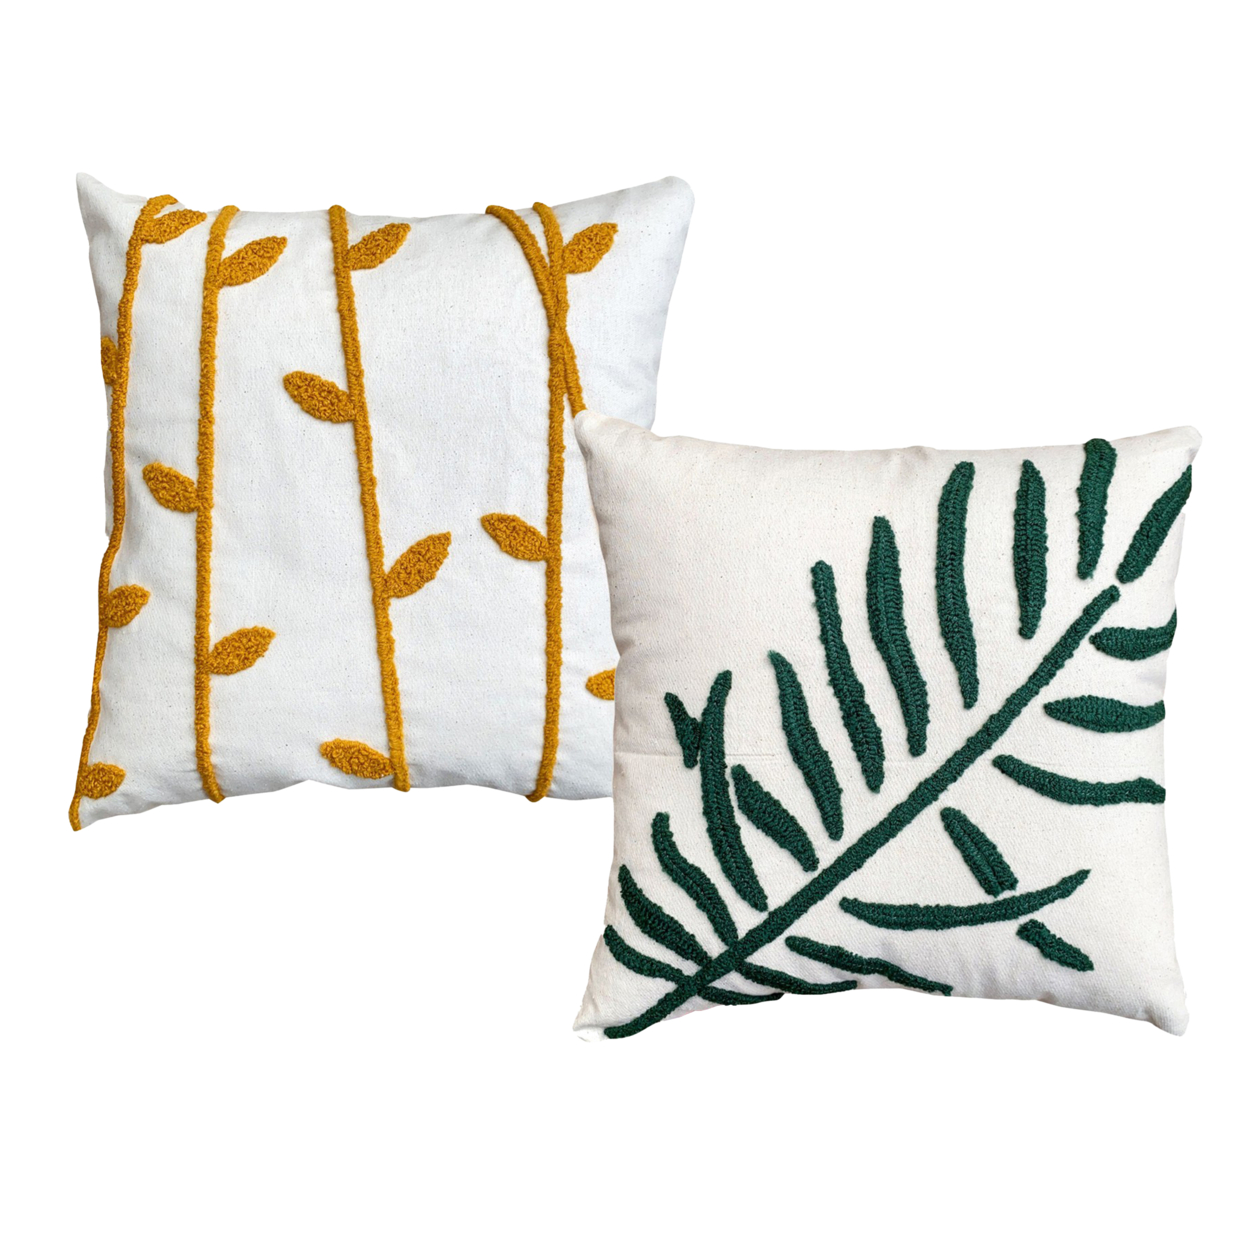 17 X 17 Inch Square Cotton Accent Throw Pillows, Leaf Embroidery, Set Of 2, White, Green, Yellow